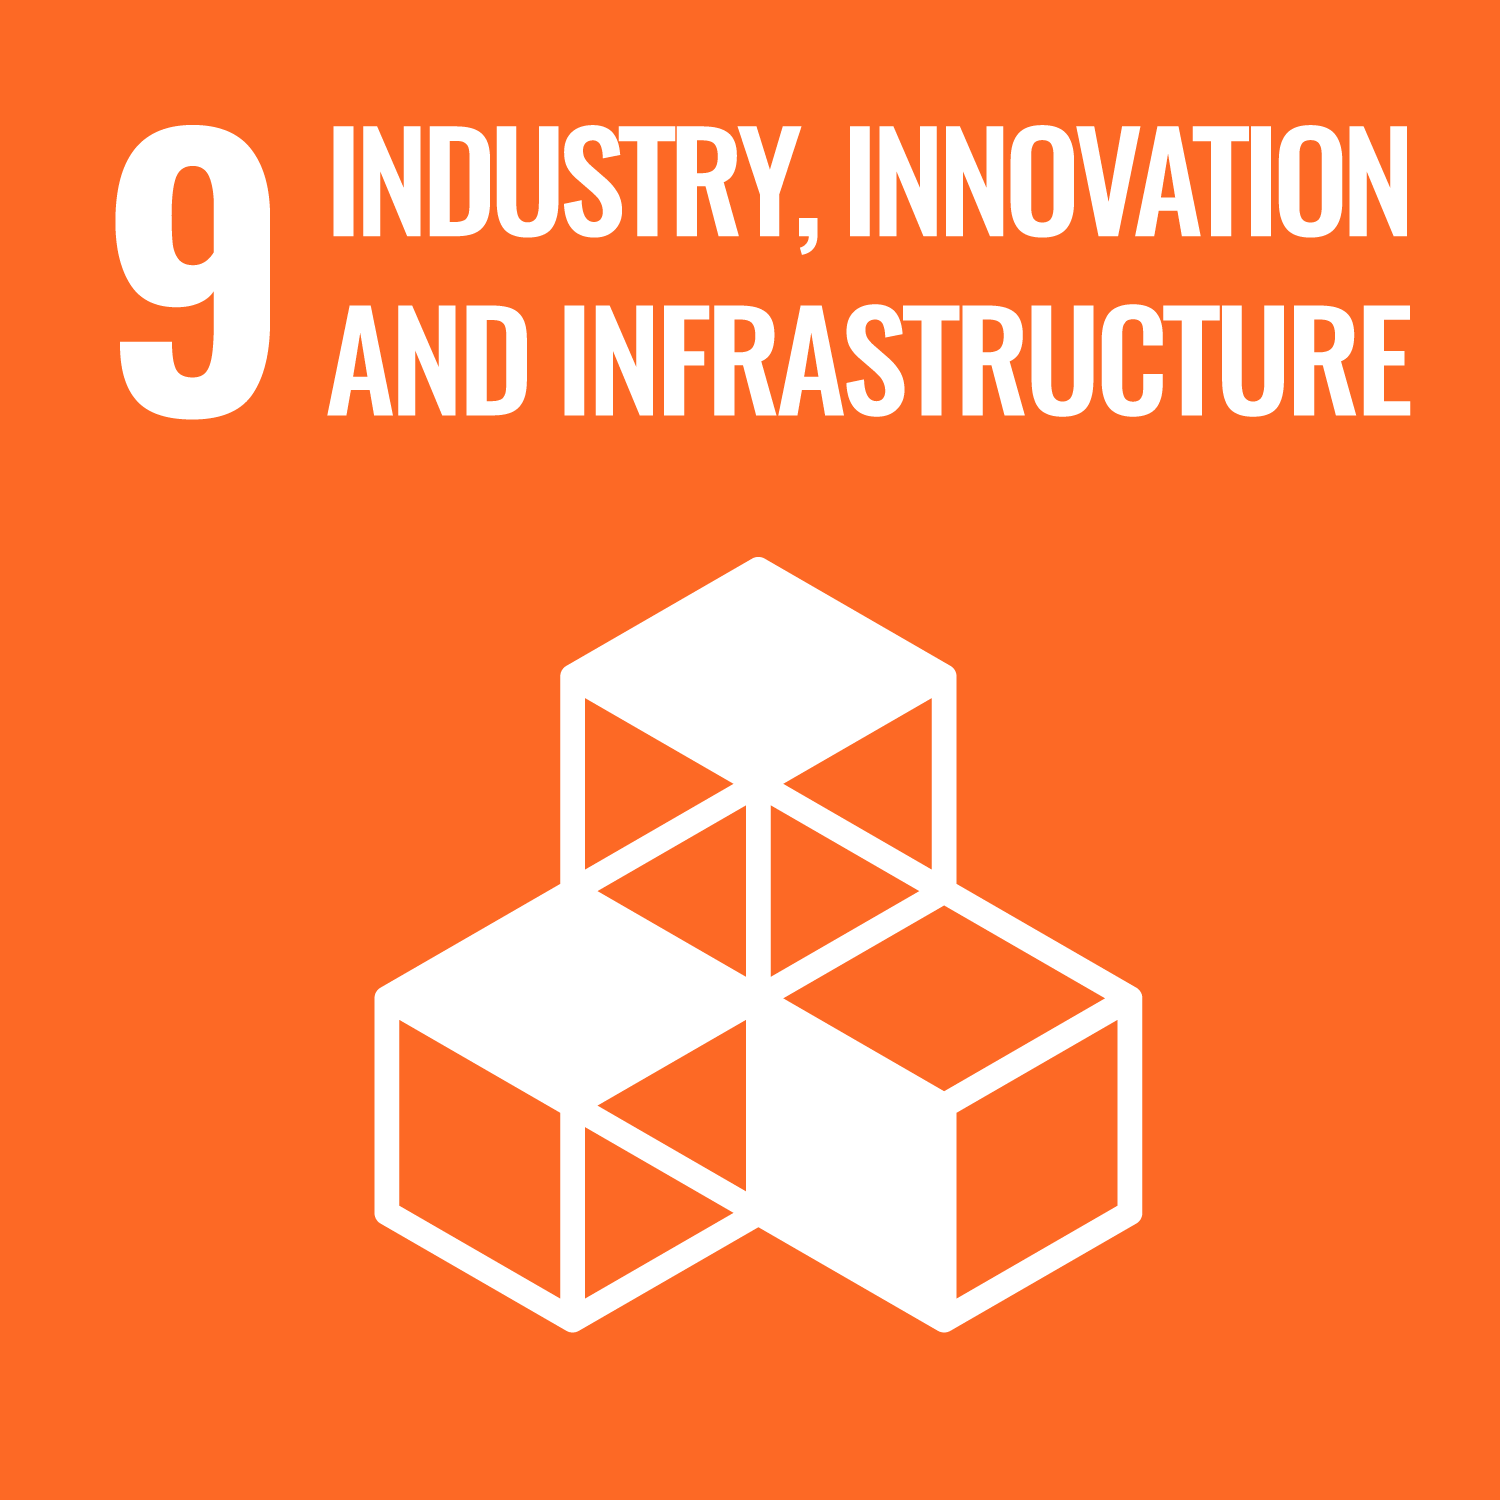 09.INDUSTORY,INNOVATION AND INFRASTRUCTURE